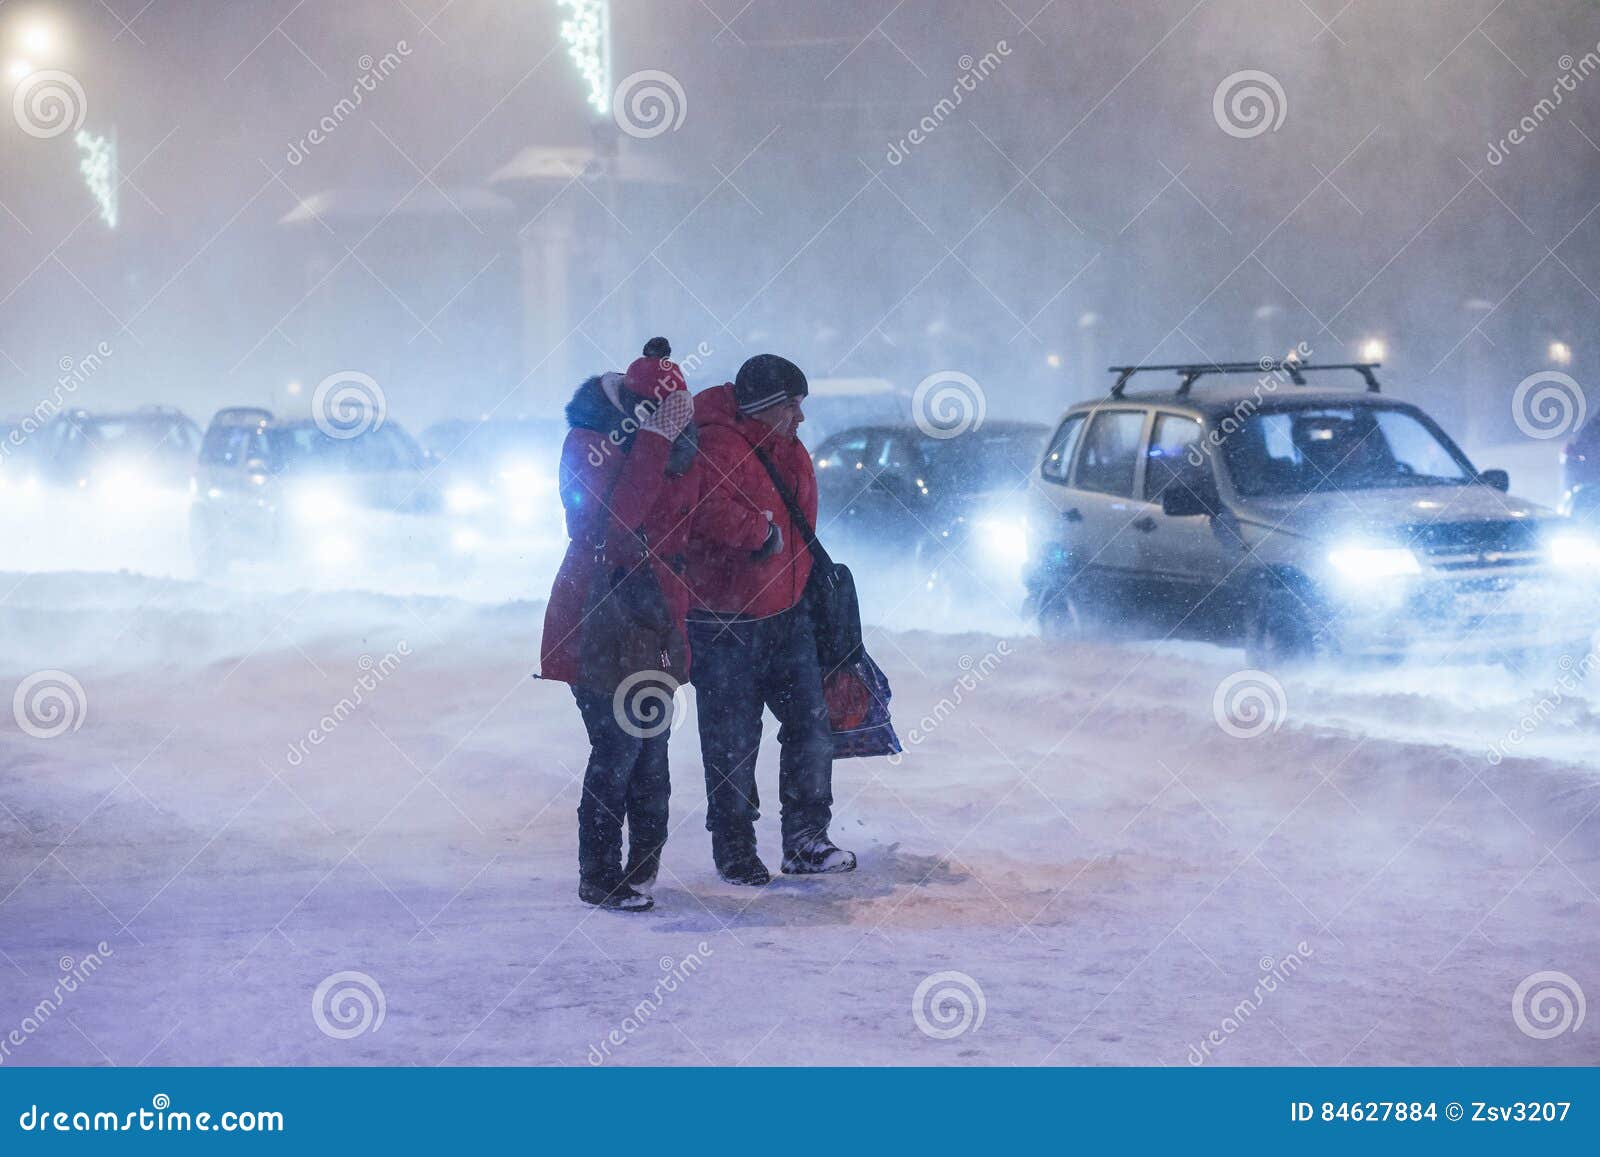 Arkhangelsk, Russia - January 22, 2017: Man And Woman ...
